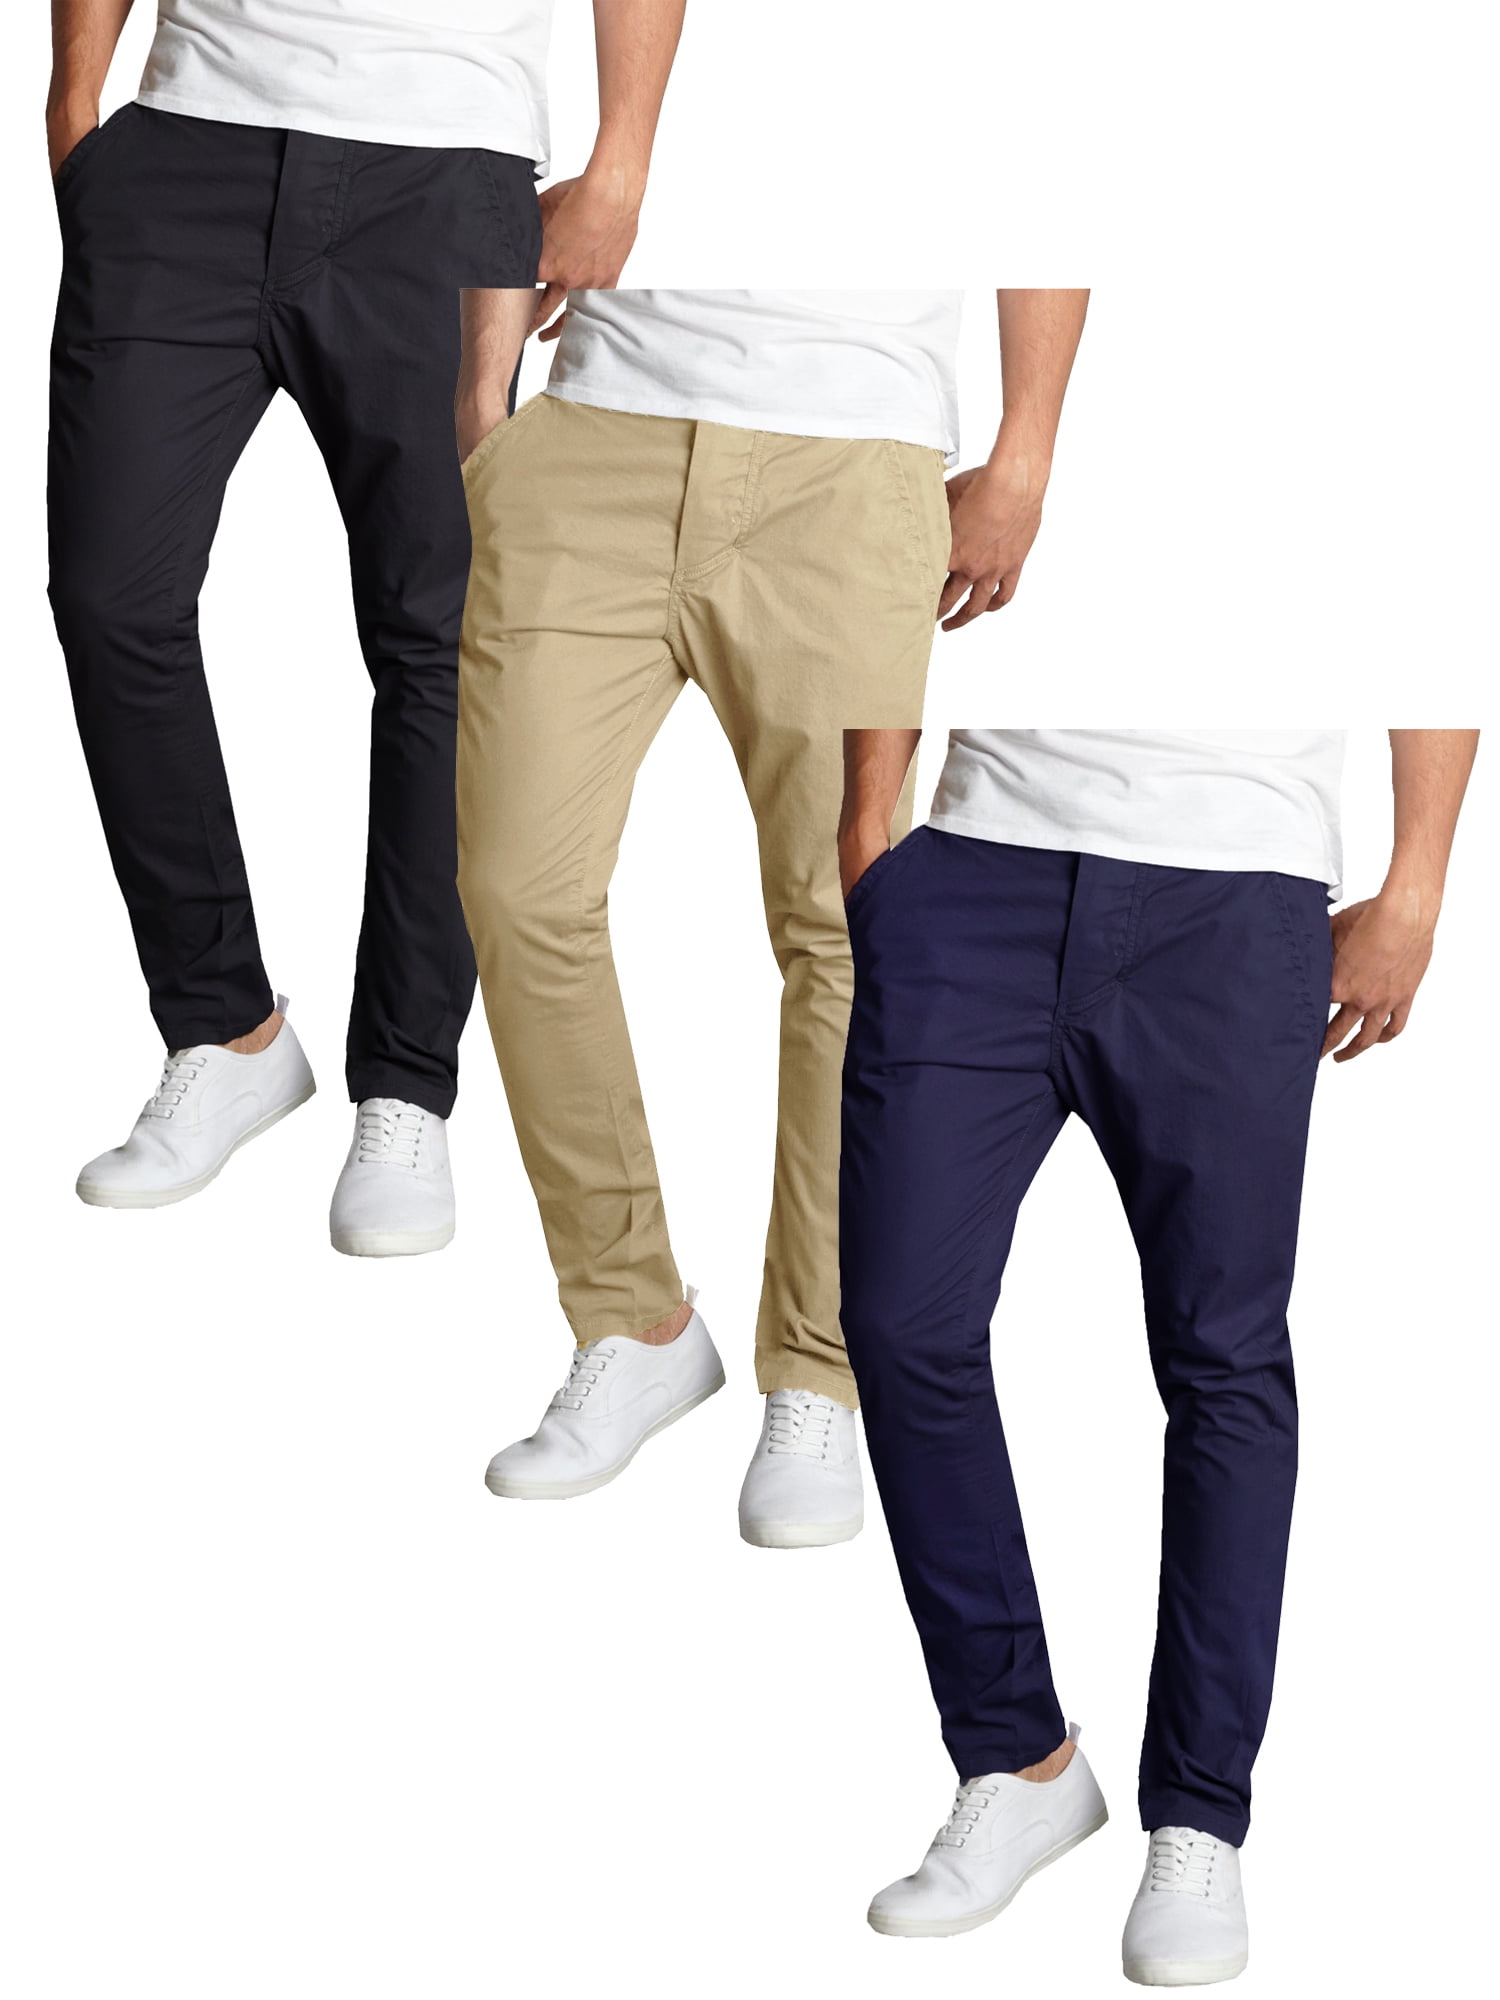 Mens Casual Slim Fit Chinos Jeans Trousers Cotton Stretch Super Comfy Style Sale 